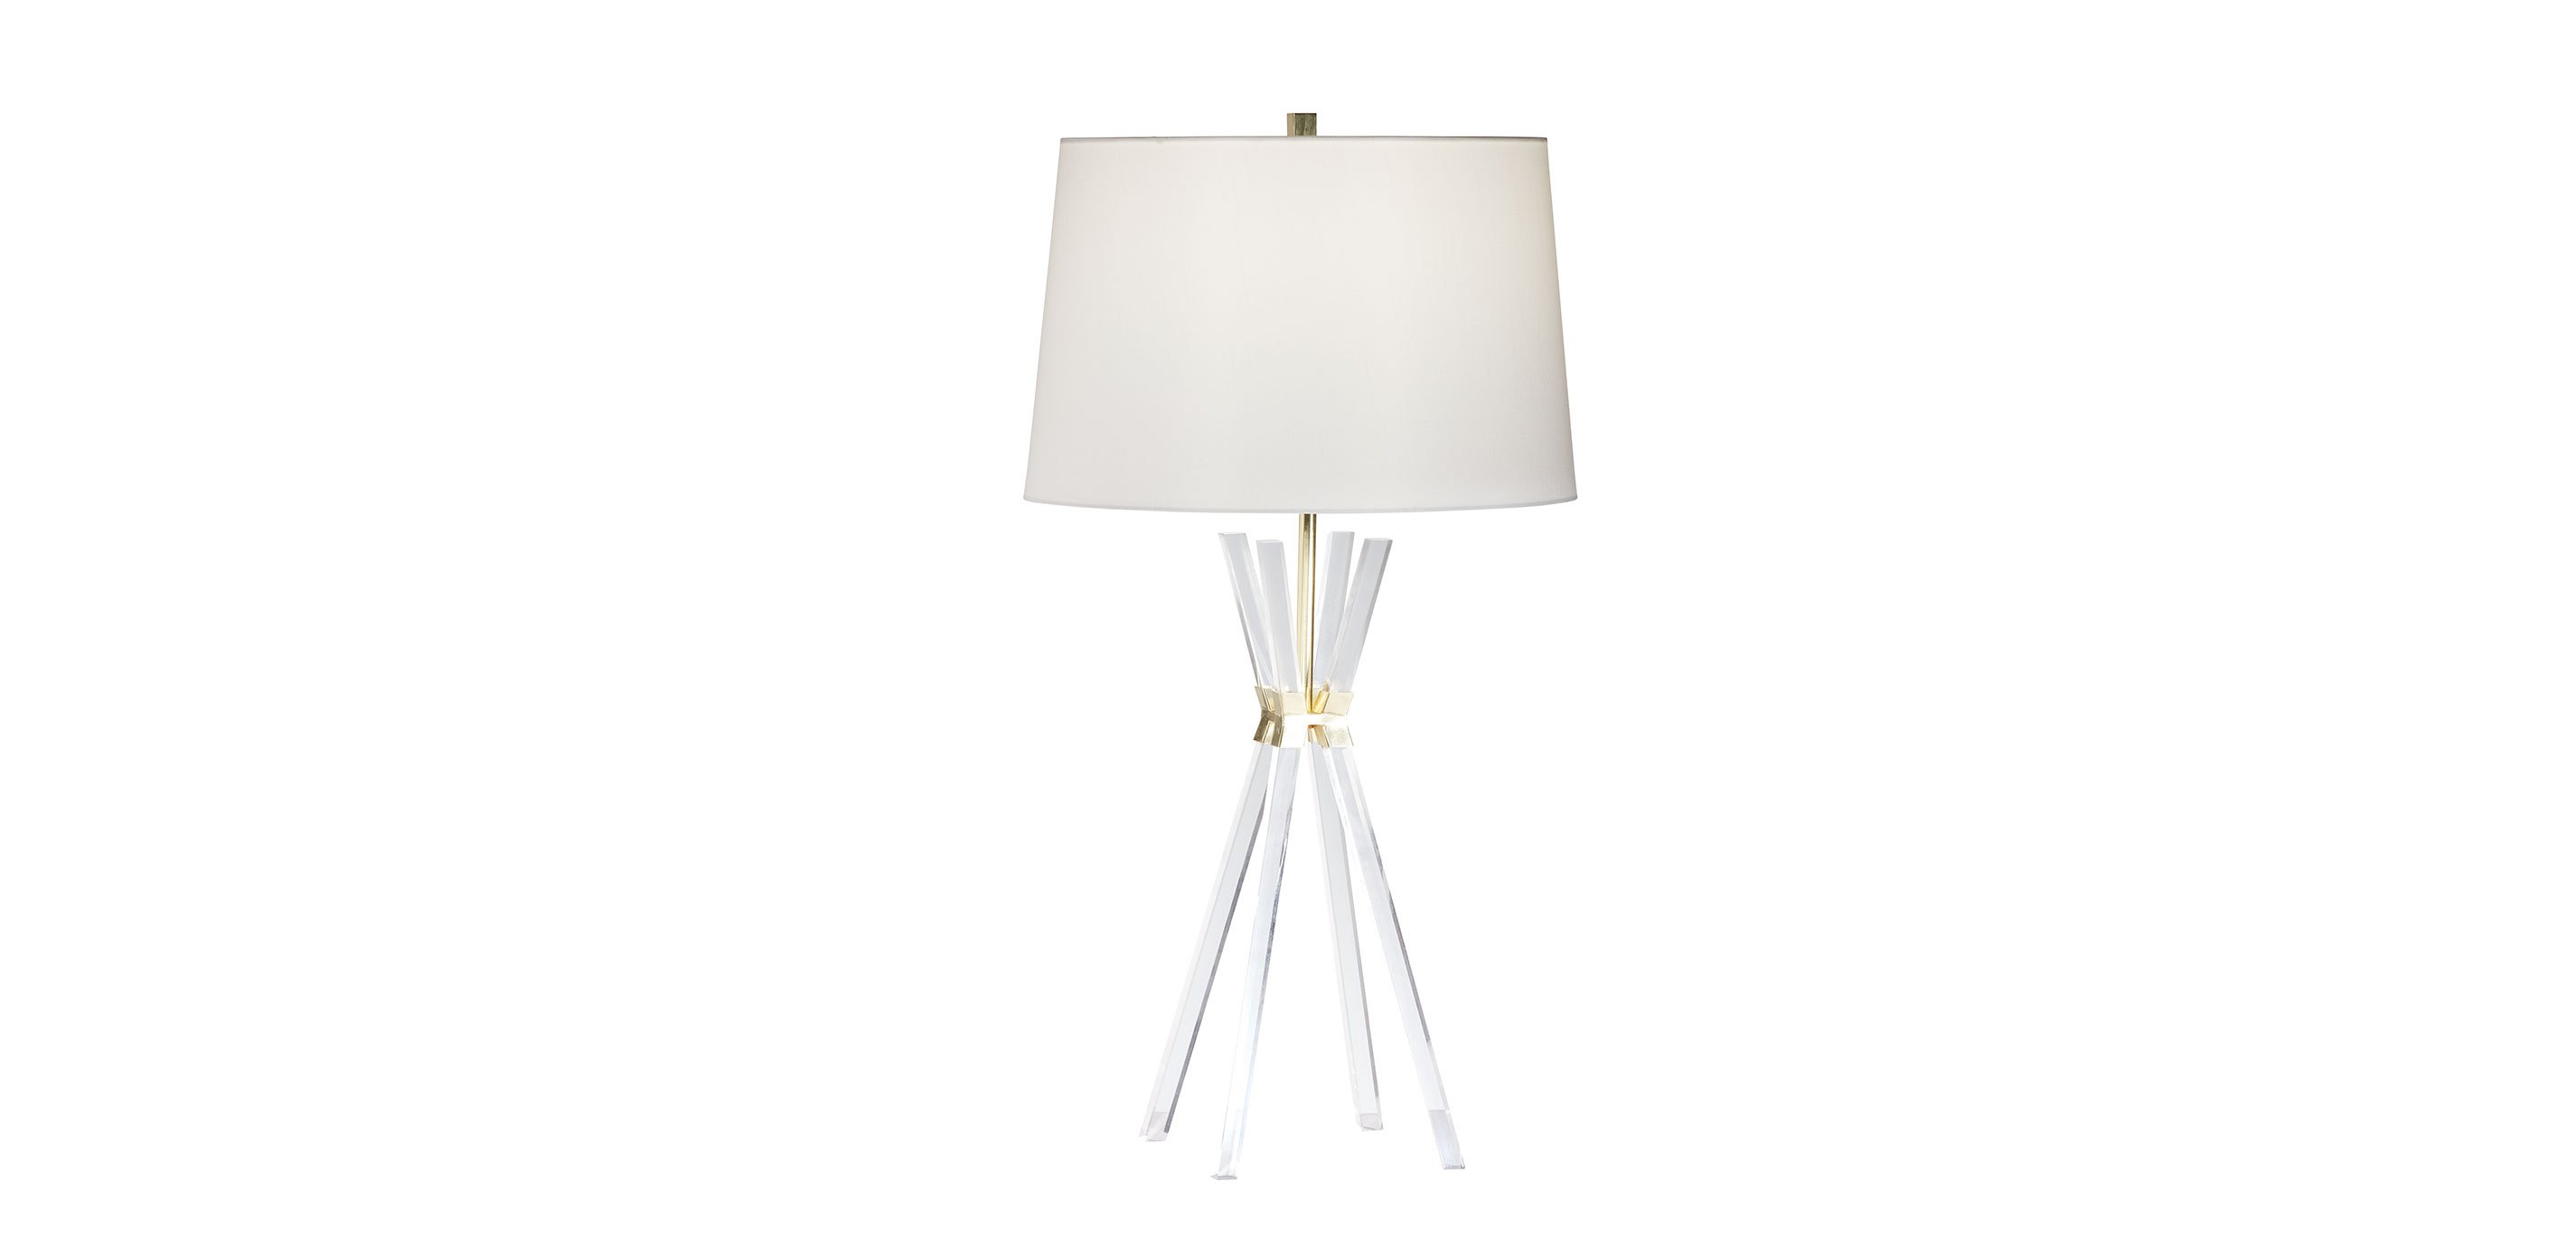 hier Orkaan Droogte Jayce Acrylic Table Lamp | Modern Table Lamps | Ethan Allen